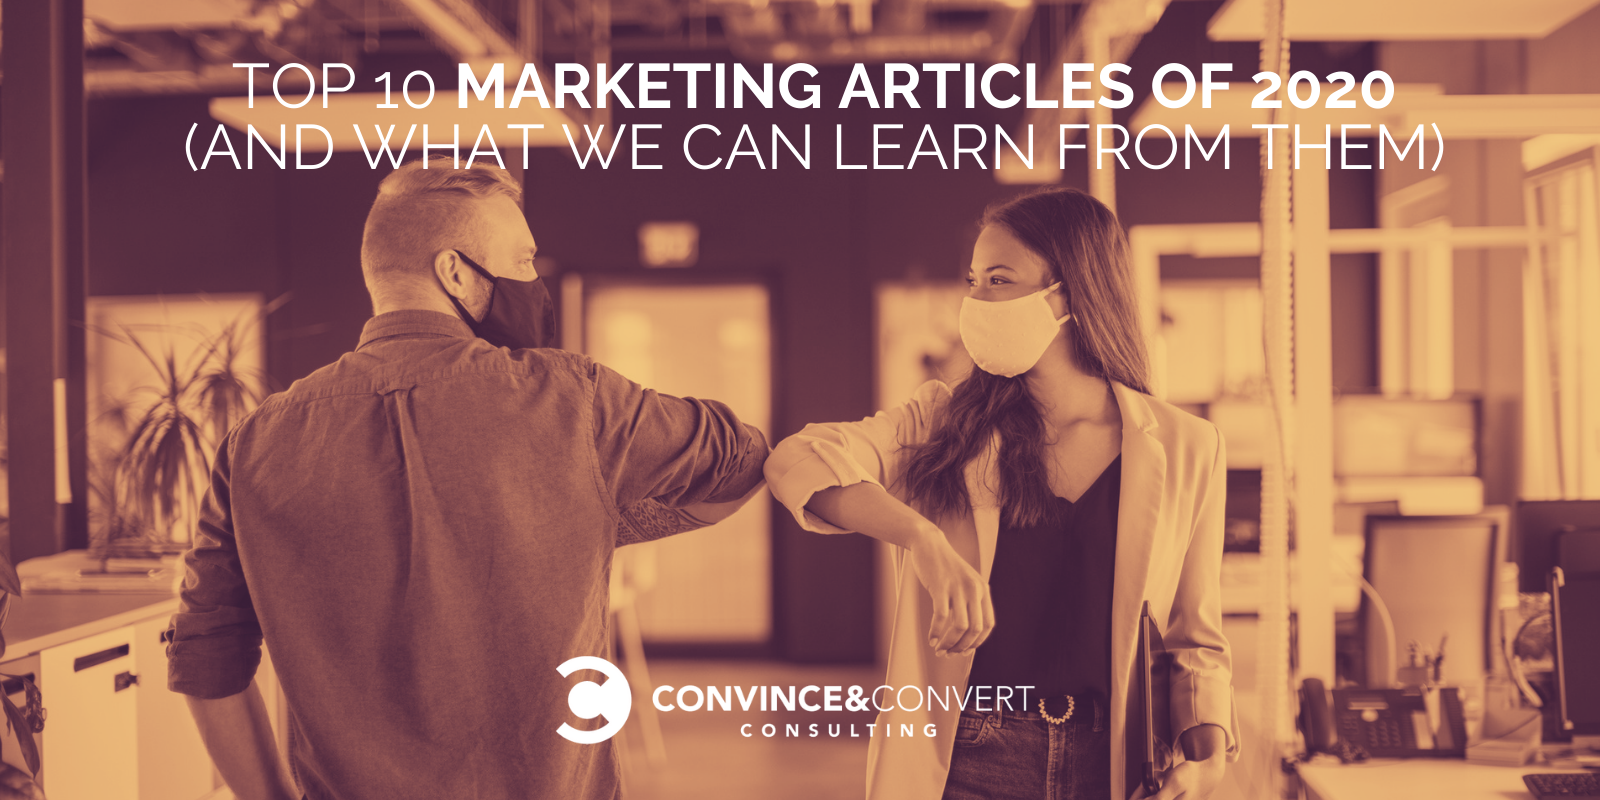 You are currently viewing Top 10 Marketing Articles for 2020 (and What We Can Learn from Them)